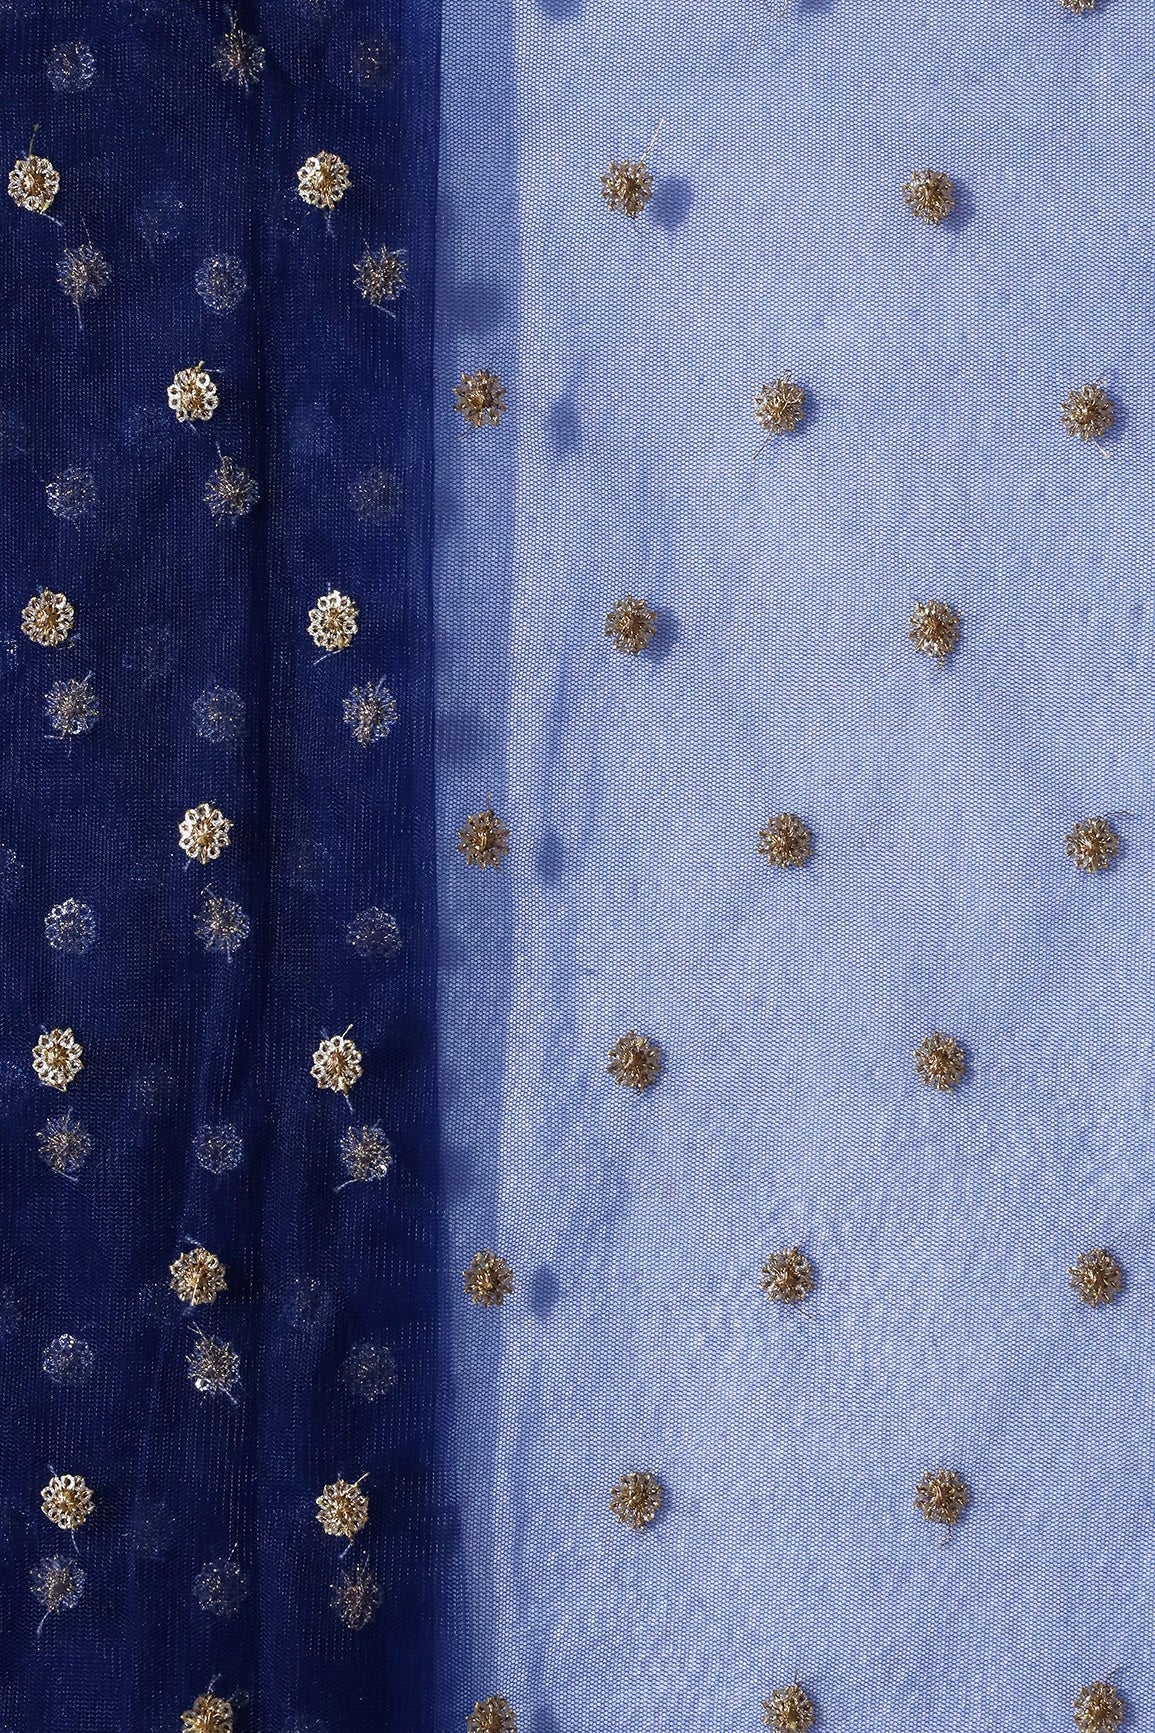 Gold Glitter Sequins Small Motif Embroidery Work On Navy Blue Soft Net Fabric